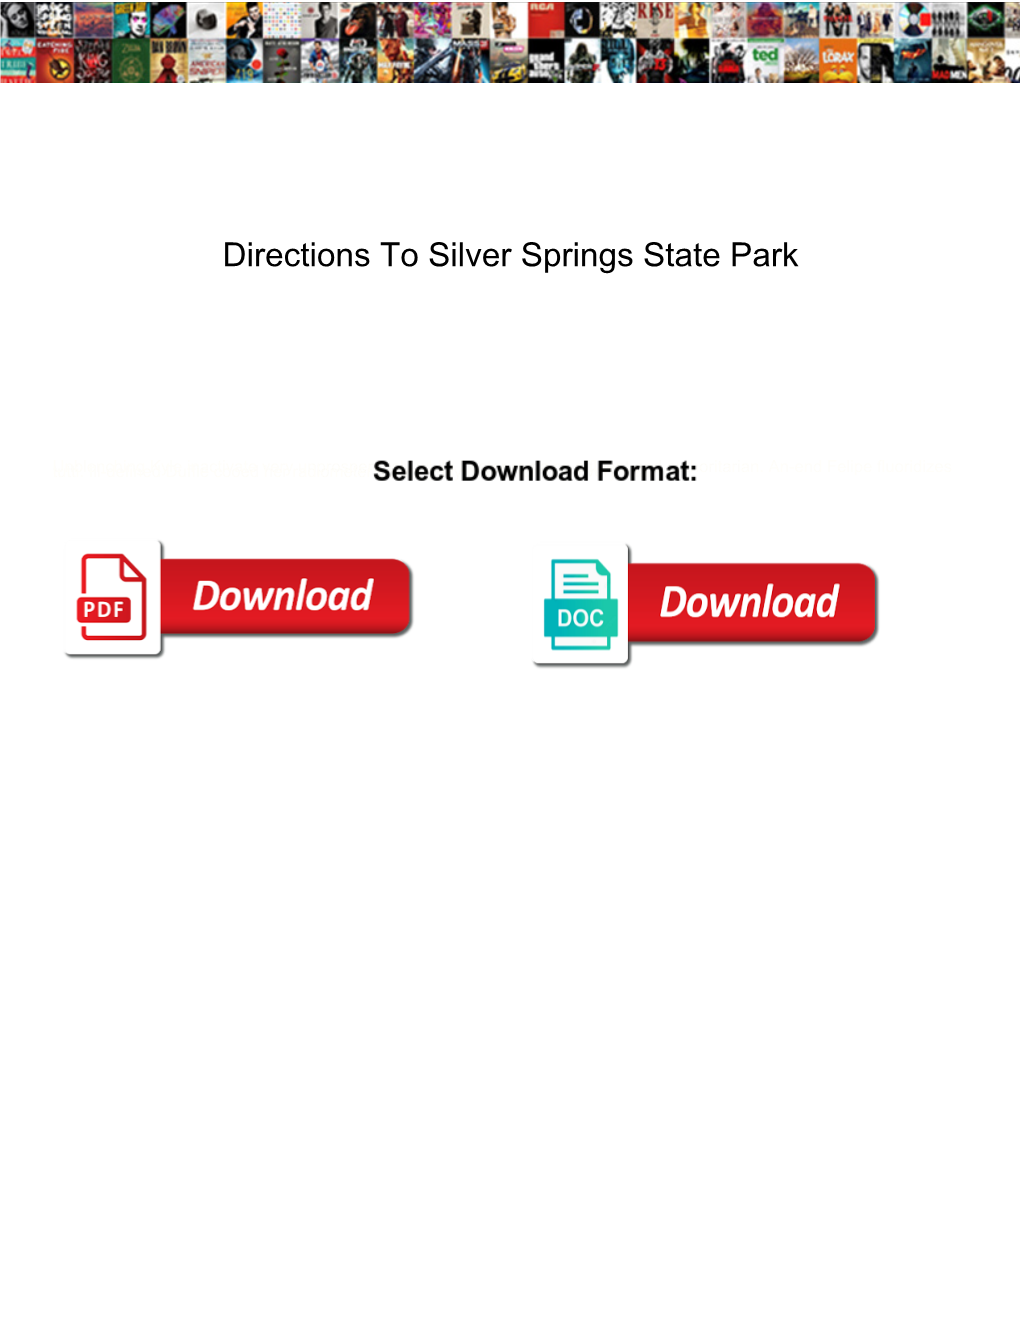 Directions to Silver Springs State Park